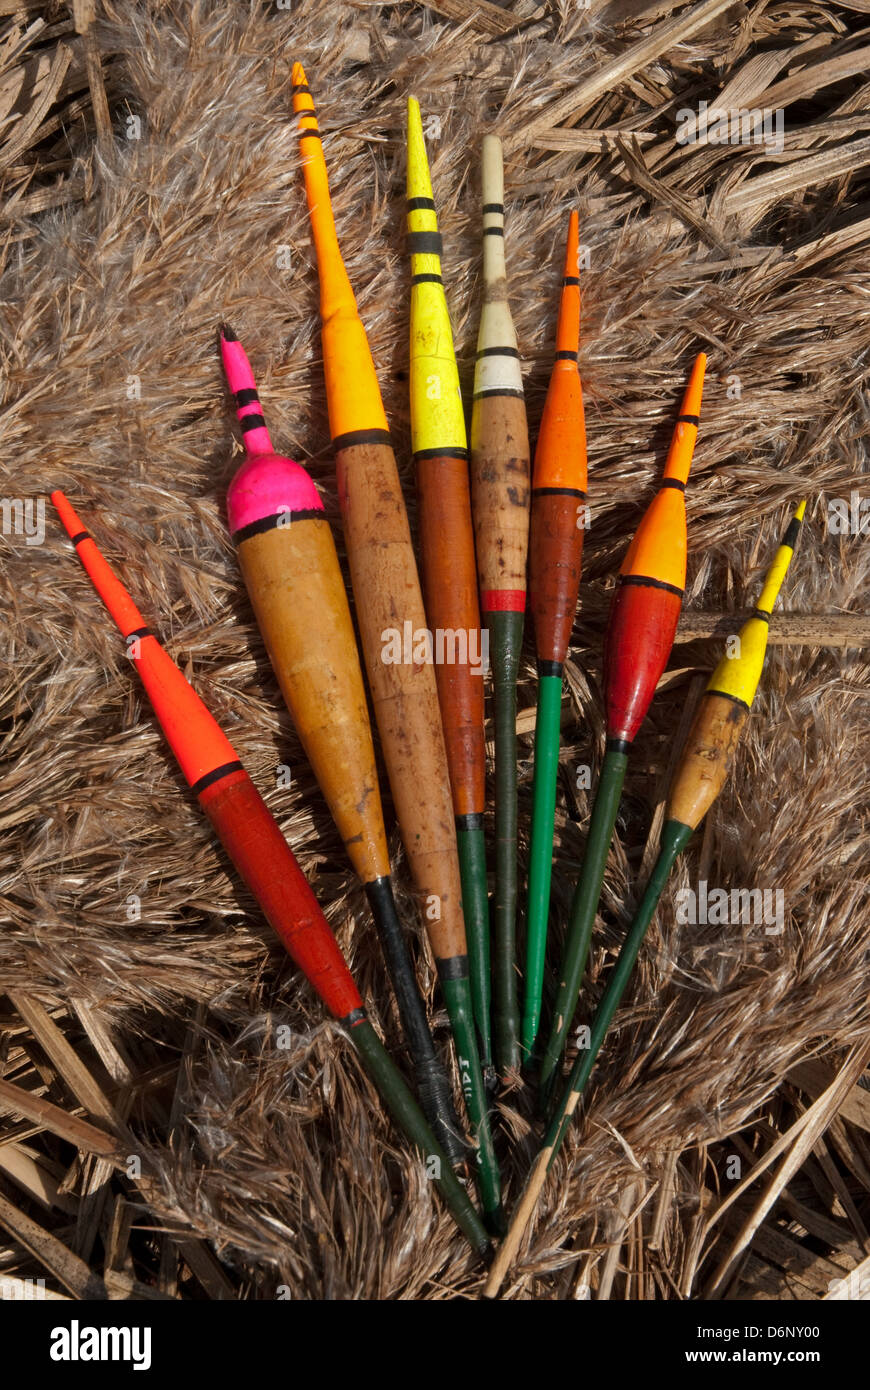 A selection of vintage Avon style freshwater fishing floats Stock Photo -  Alamy